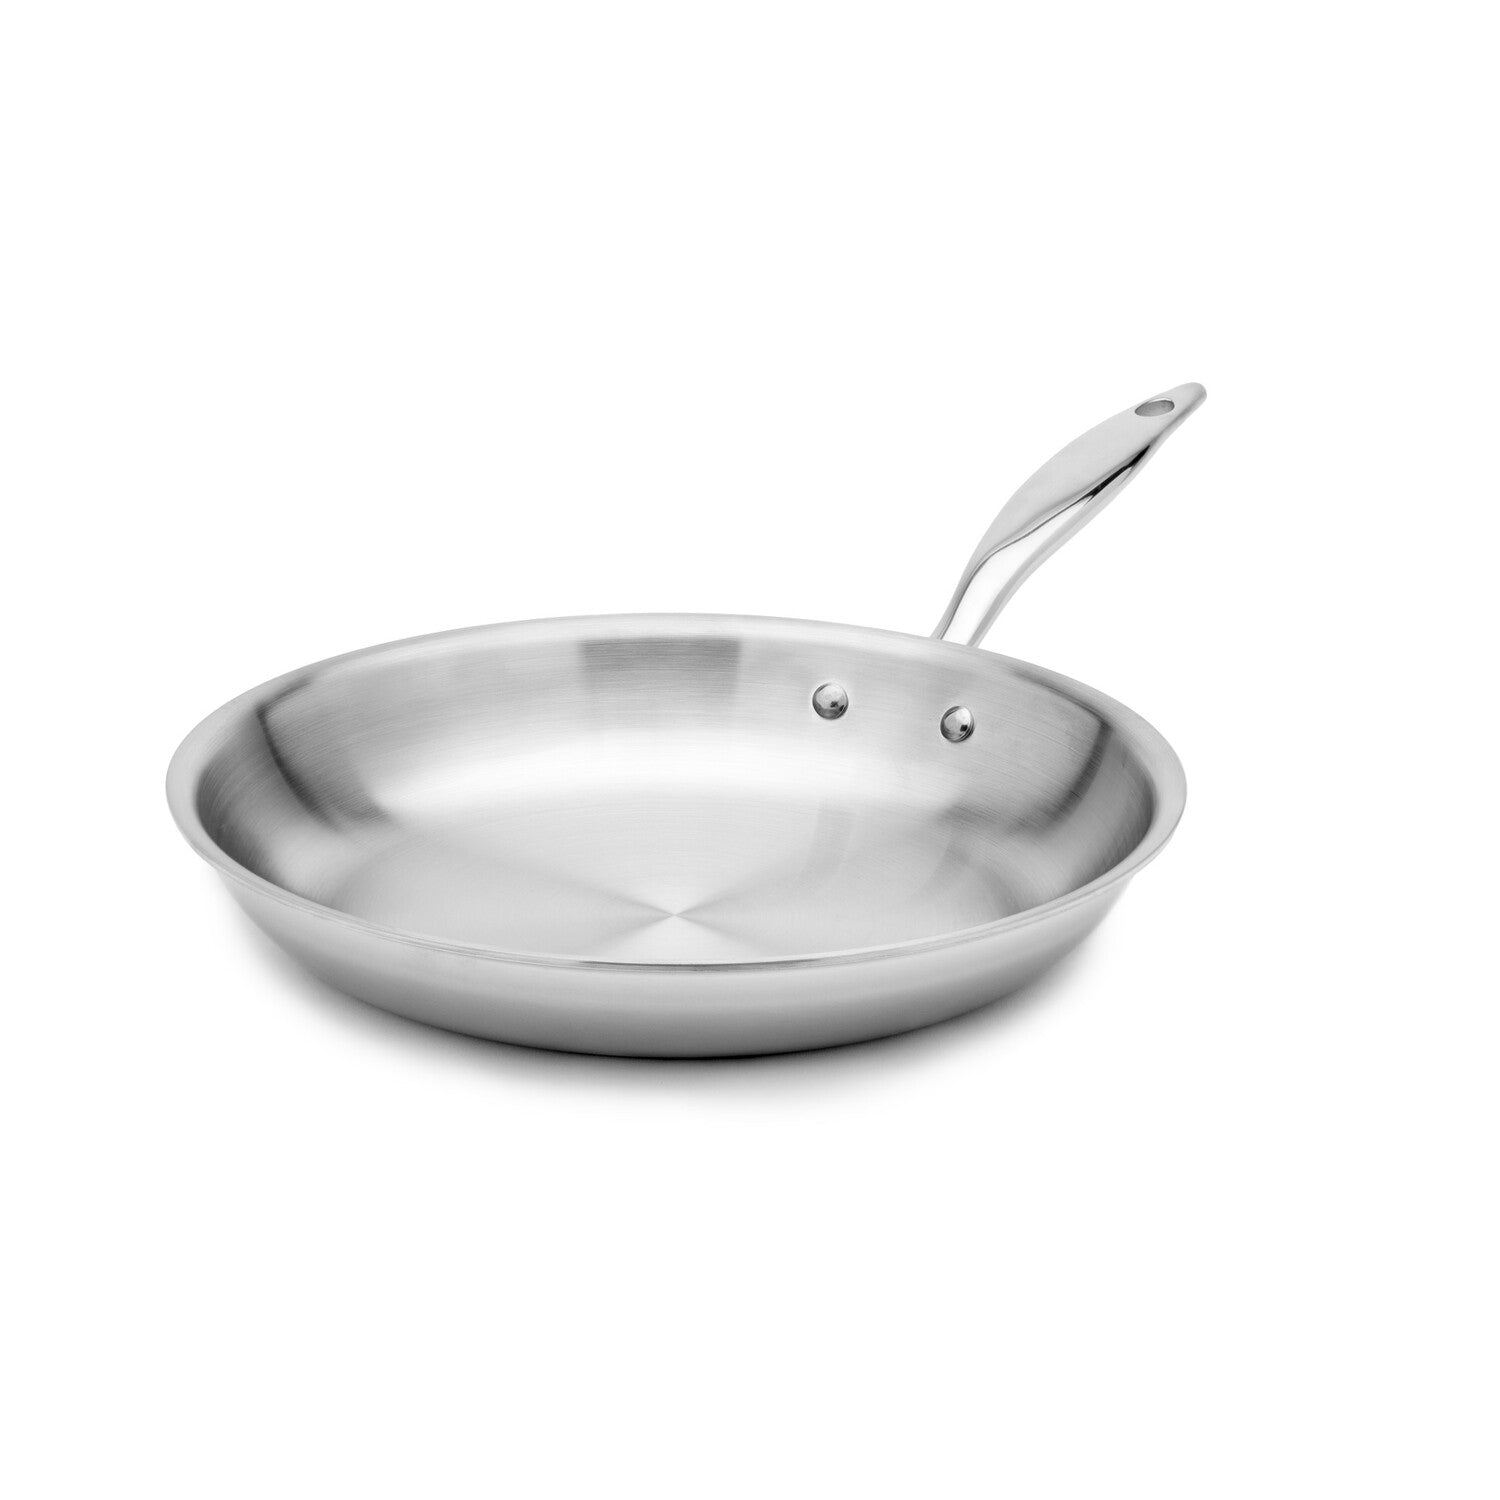 USA Pan Cookware 5-Ply Stainless Steel 8 Inch Sauté Skillet, Oven and  Dishwasher Safe, Made in the USA